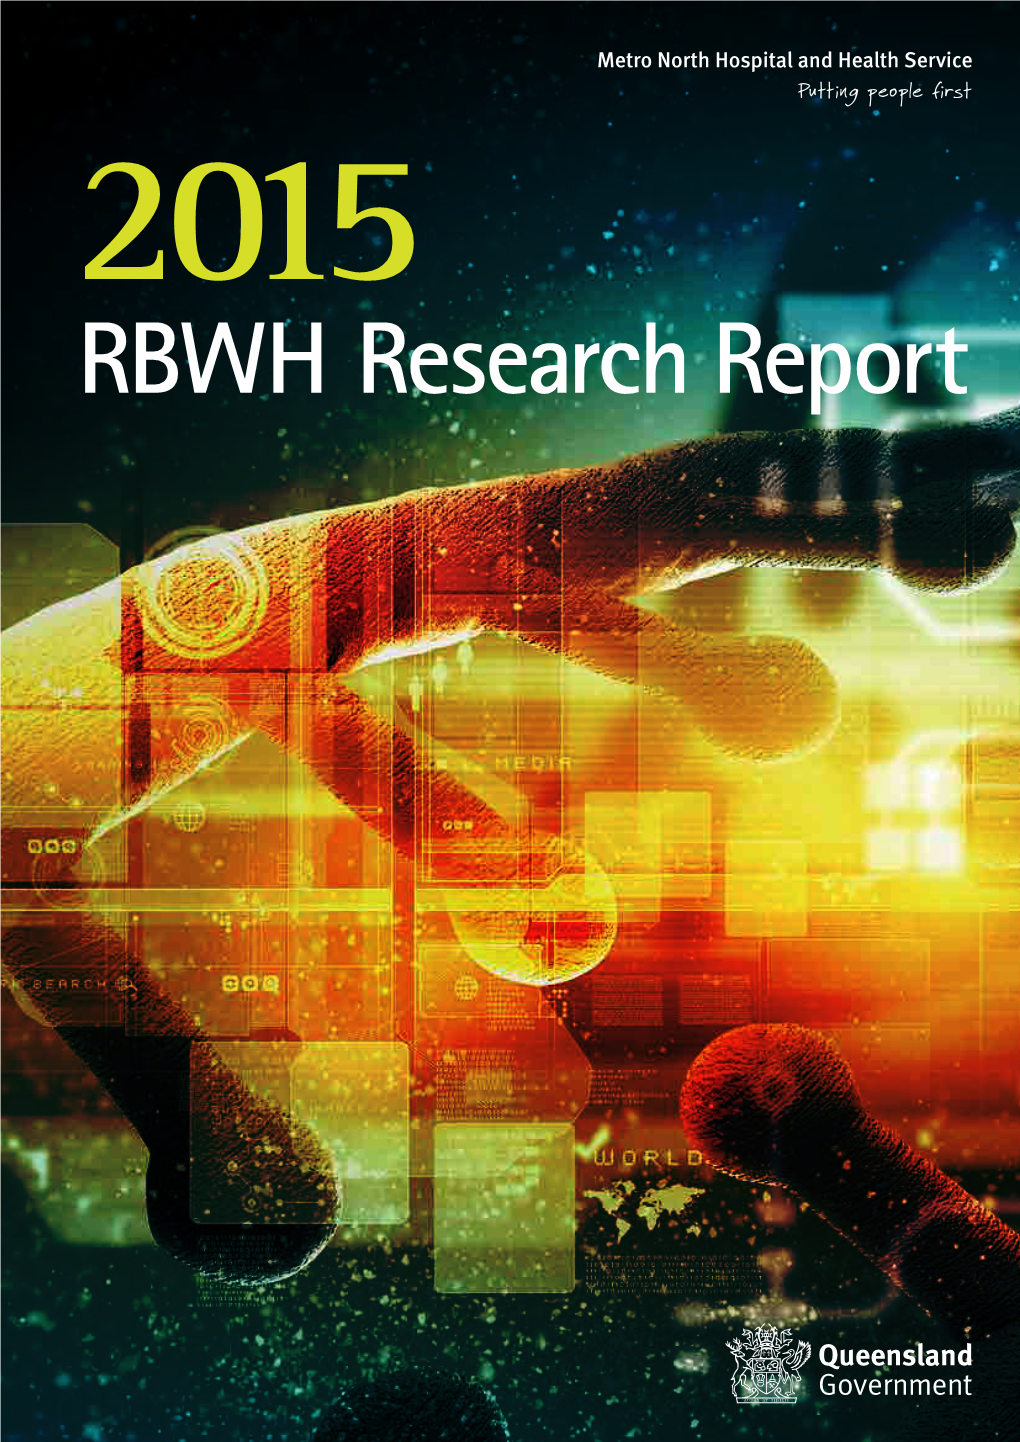 RBWH Research Report 2015